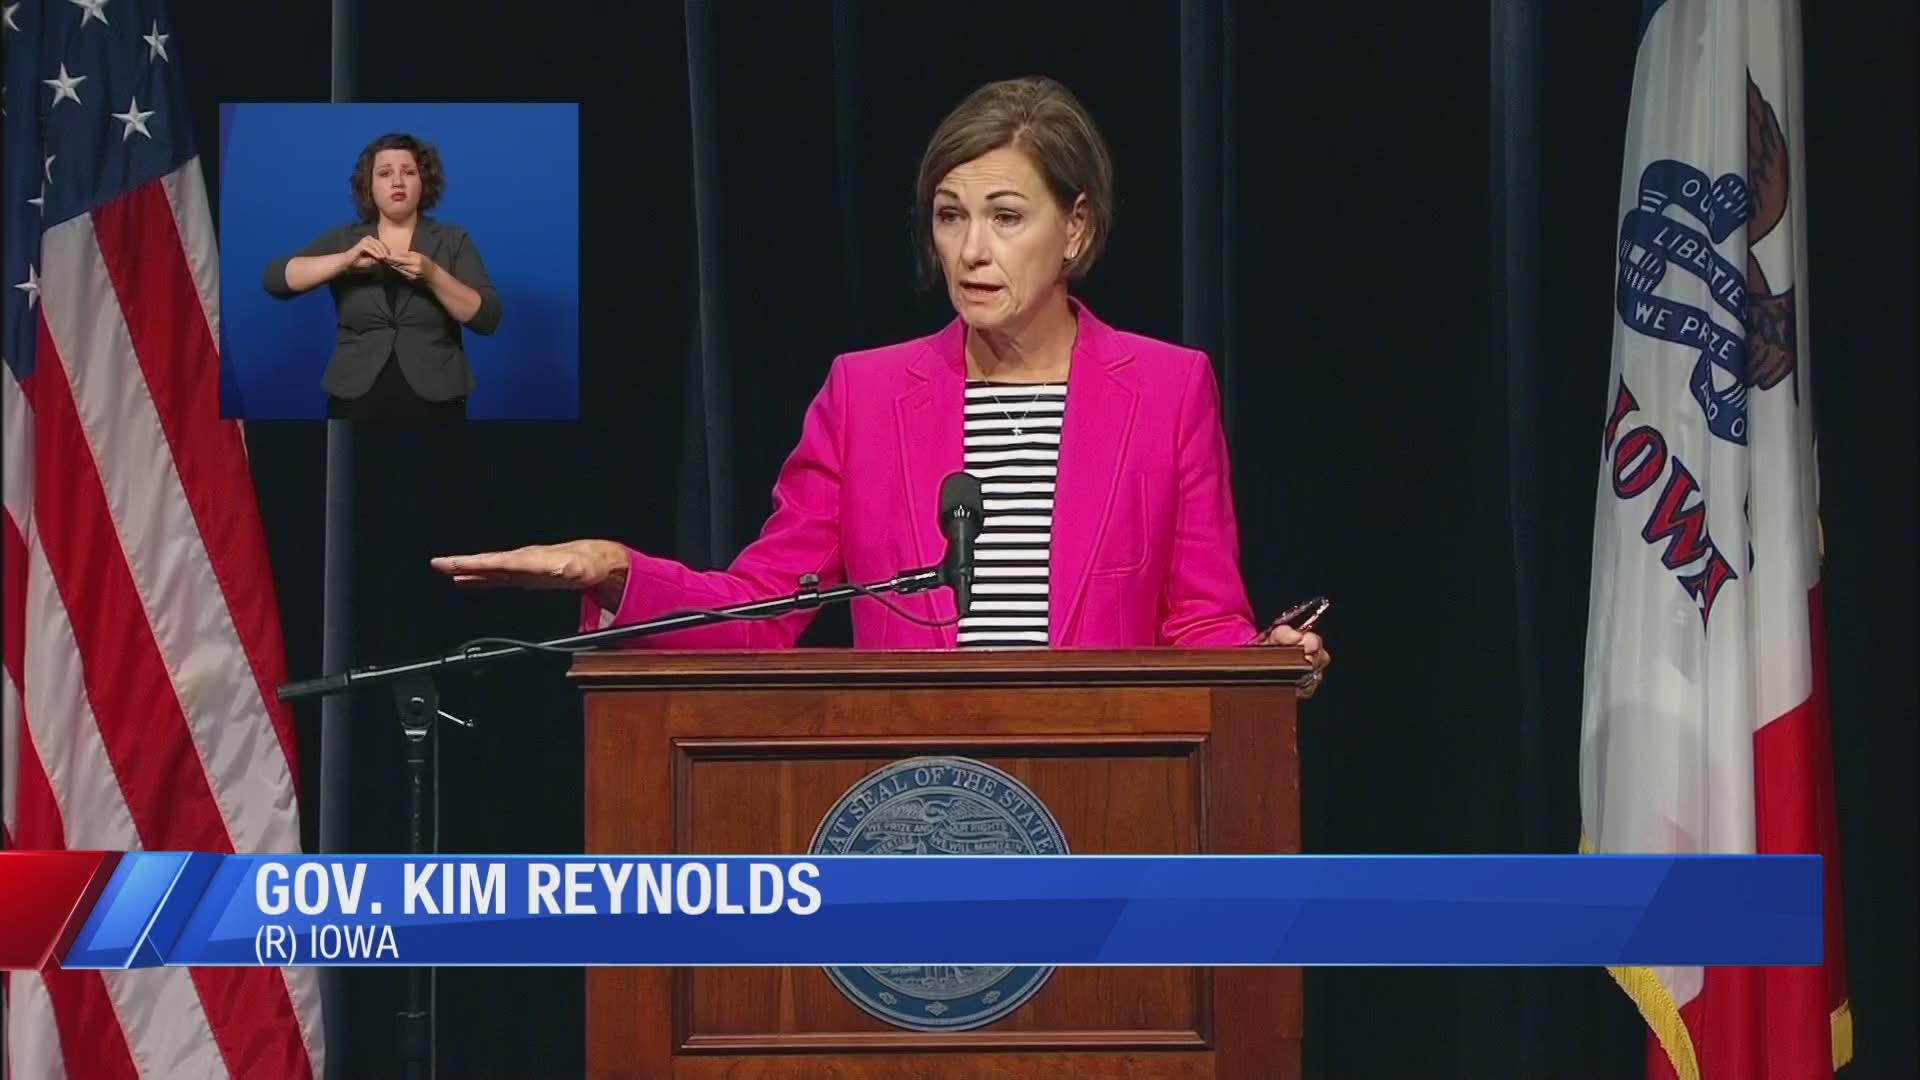 "The credibility and accuracy of our data is a top priority," Reynolds said.